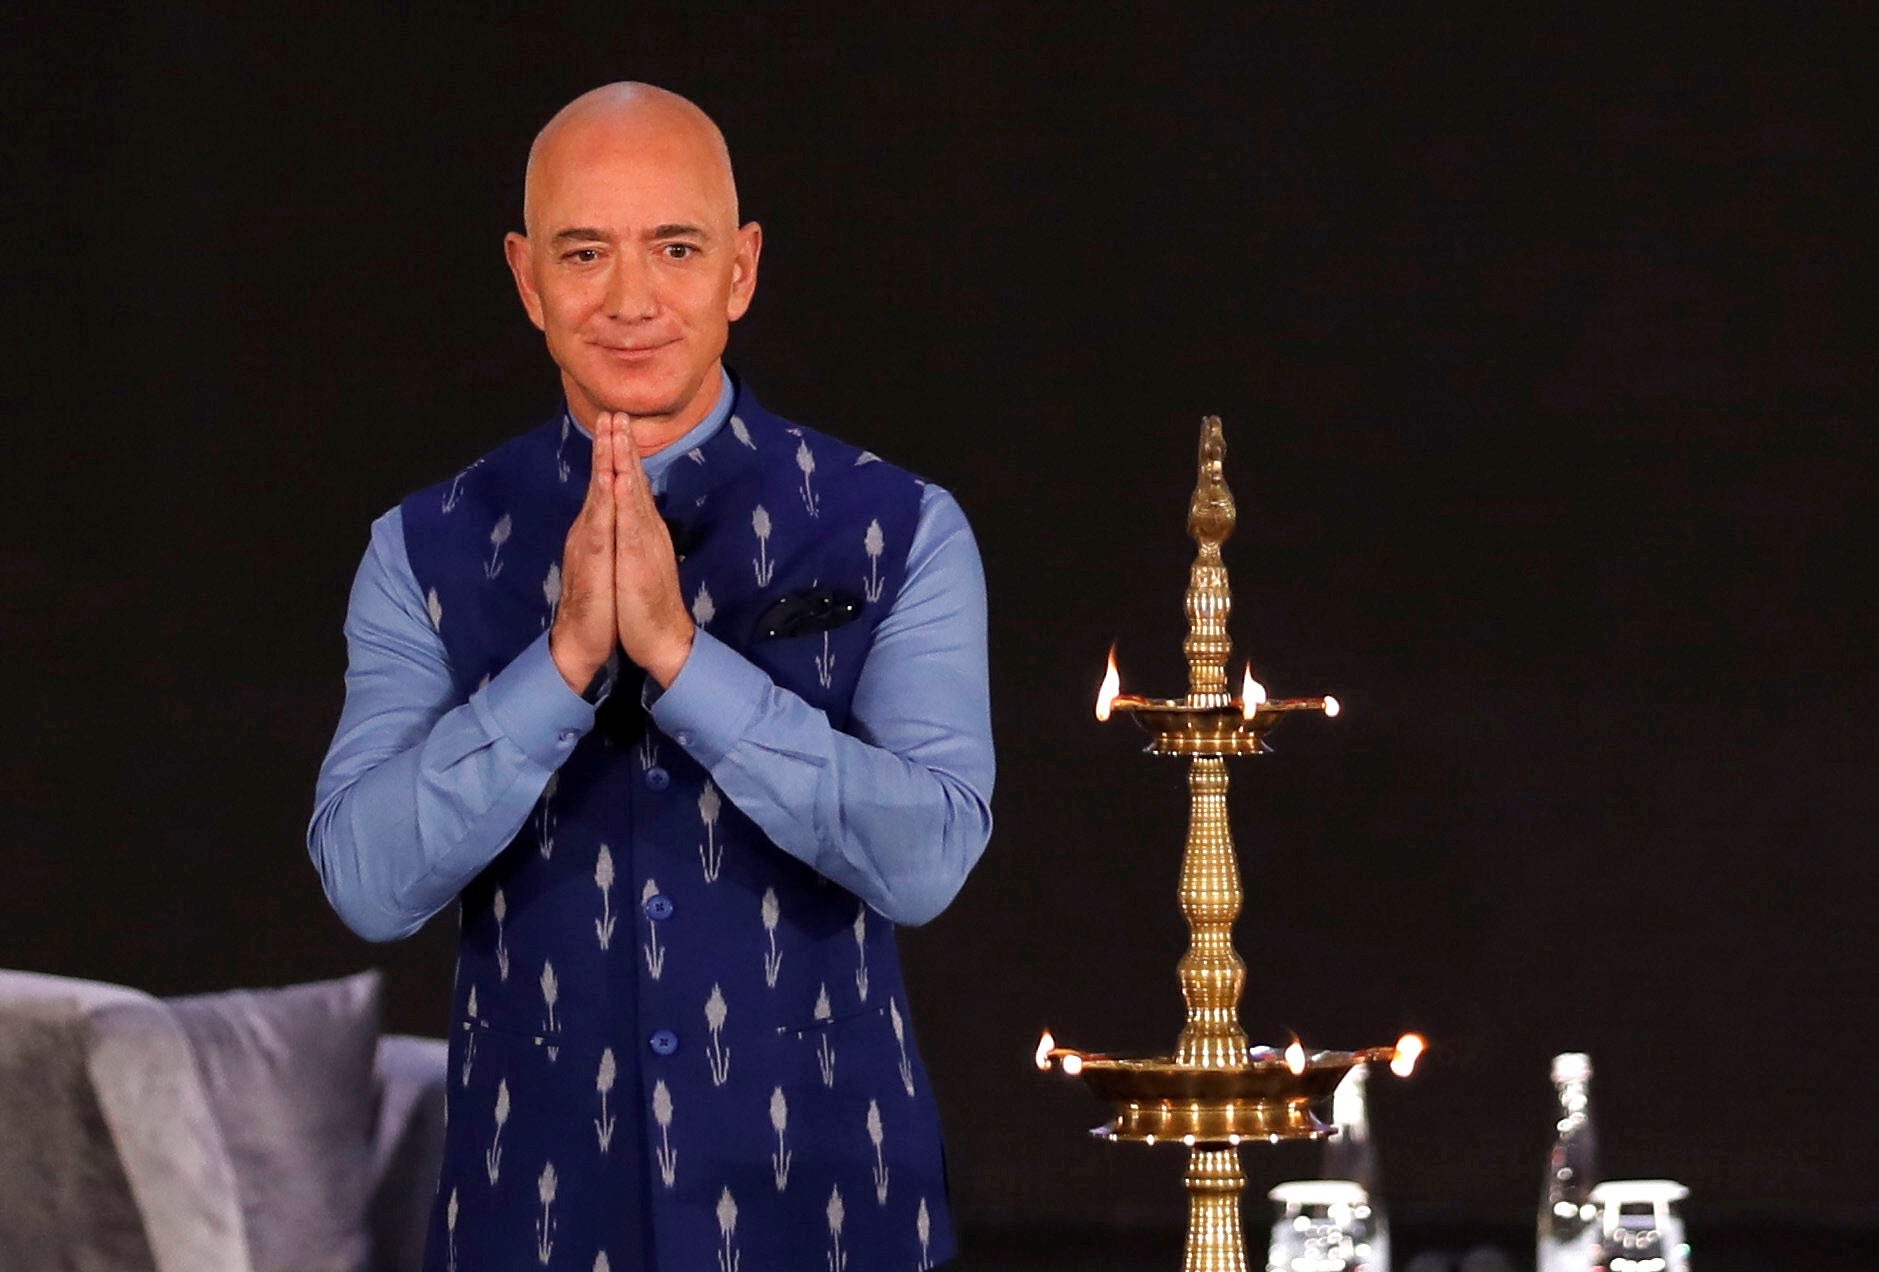 Jeff Bezos, founder of Amazon, attends a company event in Delhi on Wednesday